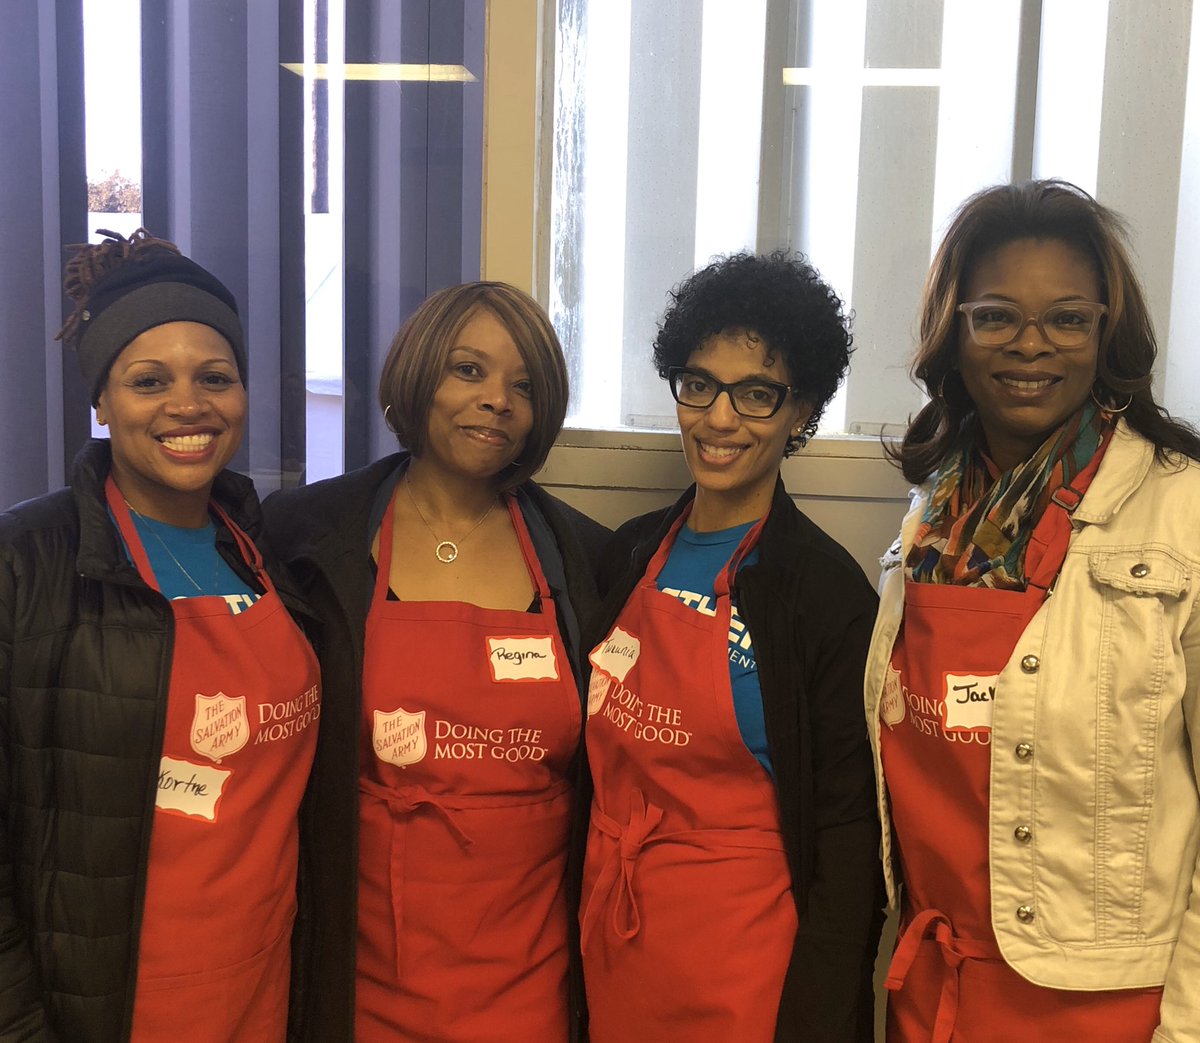 Doing The Most Good with some #awesome @ATT Ladies!!! @salvationarmy #Angels #giveback @cbrittsuccess @gfcleveland @natewatt @MarkLLinthicum #CenterOps